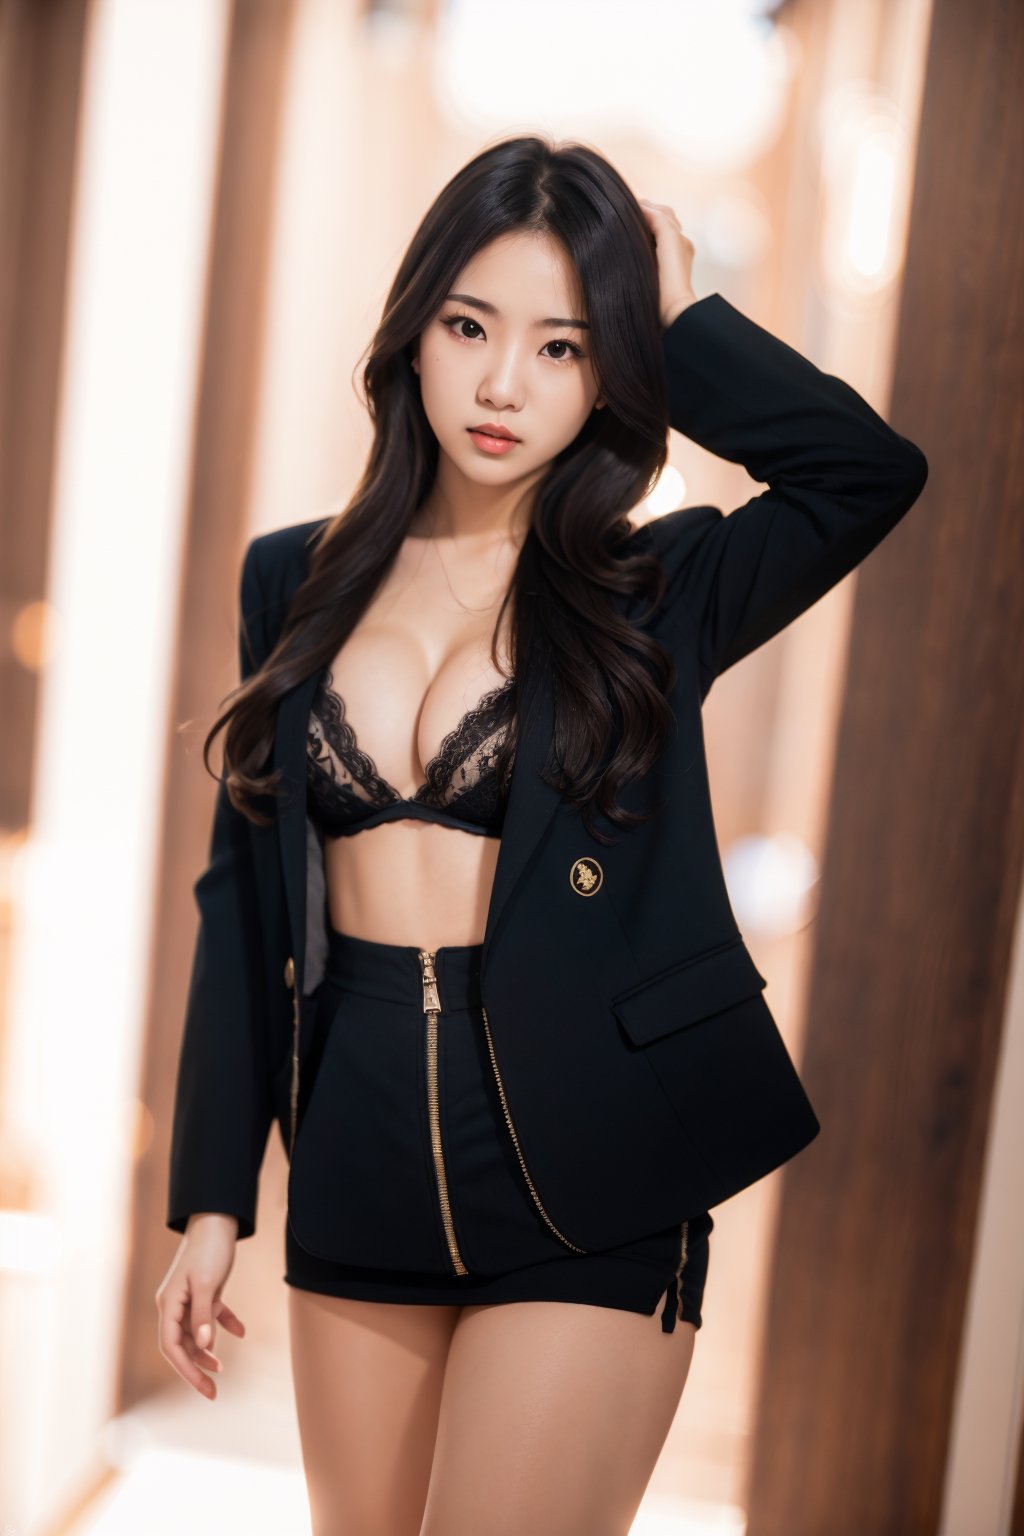 photorealistic,  raw photo, masterpiece, best quality,  8k raw photo, 1girl,  solo, long hair, ultra high resolution, 4K, 8k resolution, Leica L50mm F1.5, solo_female, standing sexy pose, in front of the camera , beautiful face, luxury black blazer, gold embroidery, flirting at viewer, medium_breasts, detailed, perfect body, asian girl, black messy hair, bukake, night beach background, perfect female body, beautiful and aesthetic,1 girl,blurry_light_background,Sexy, pose, Style, Sexy Pose, Woman, Girl,